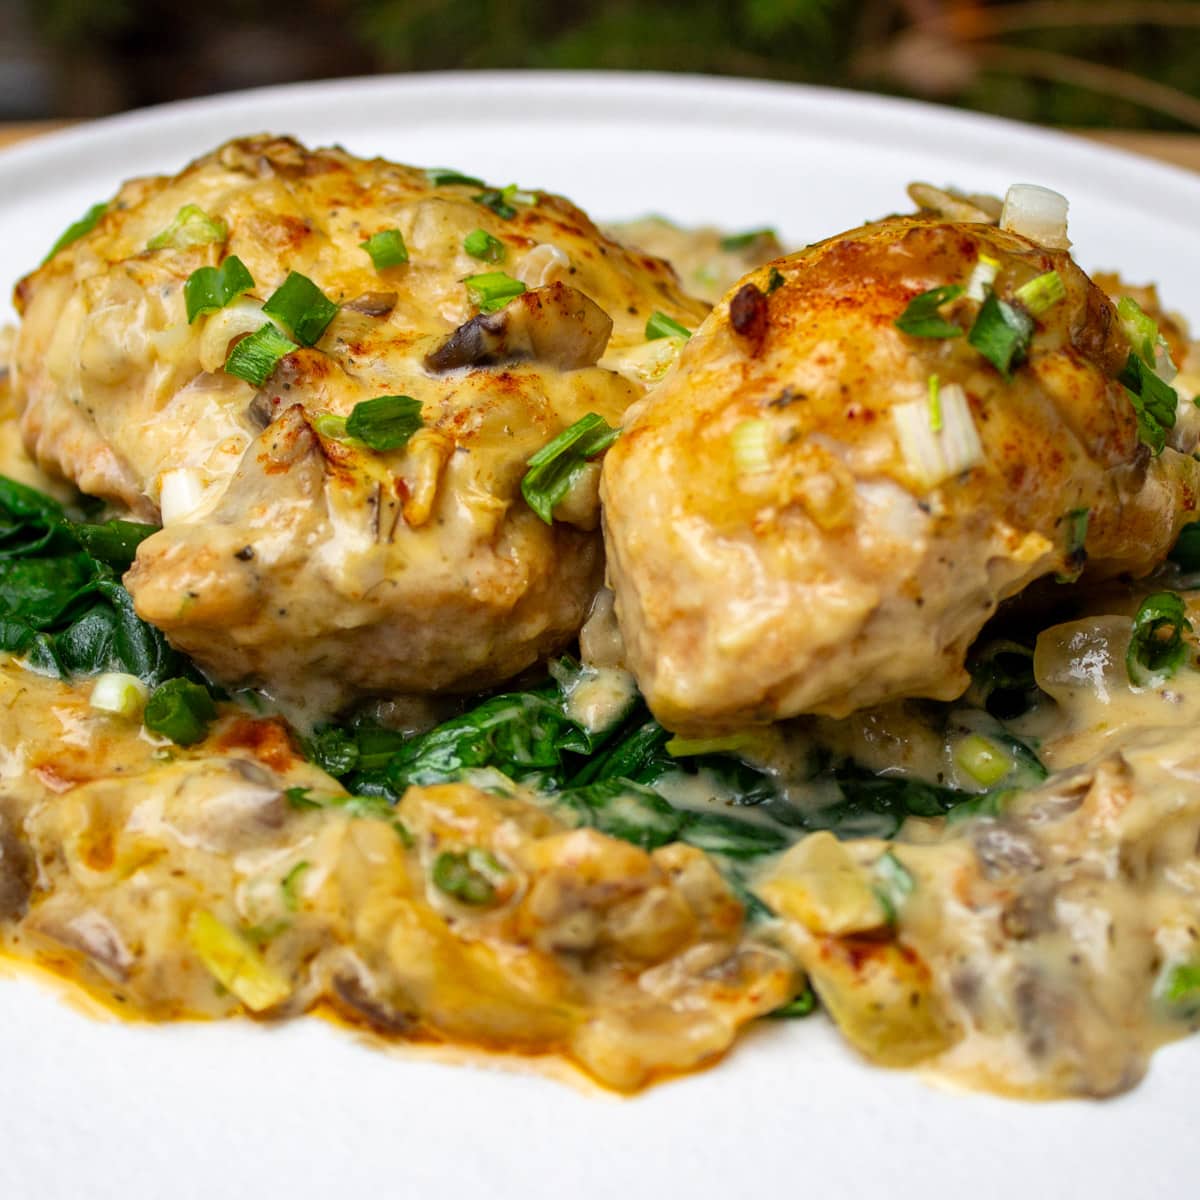 chicken pieces with cream of mushroom sauce over steamed spinach on plate.